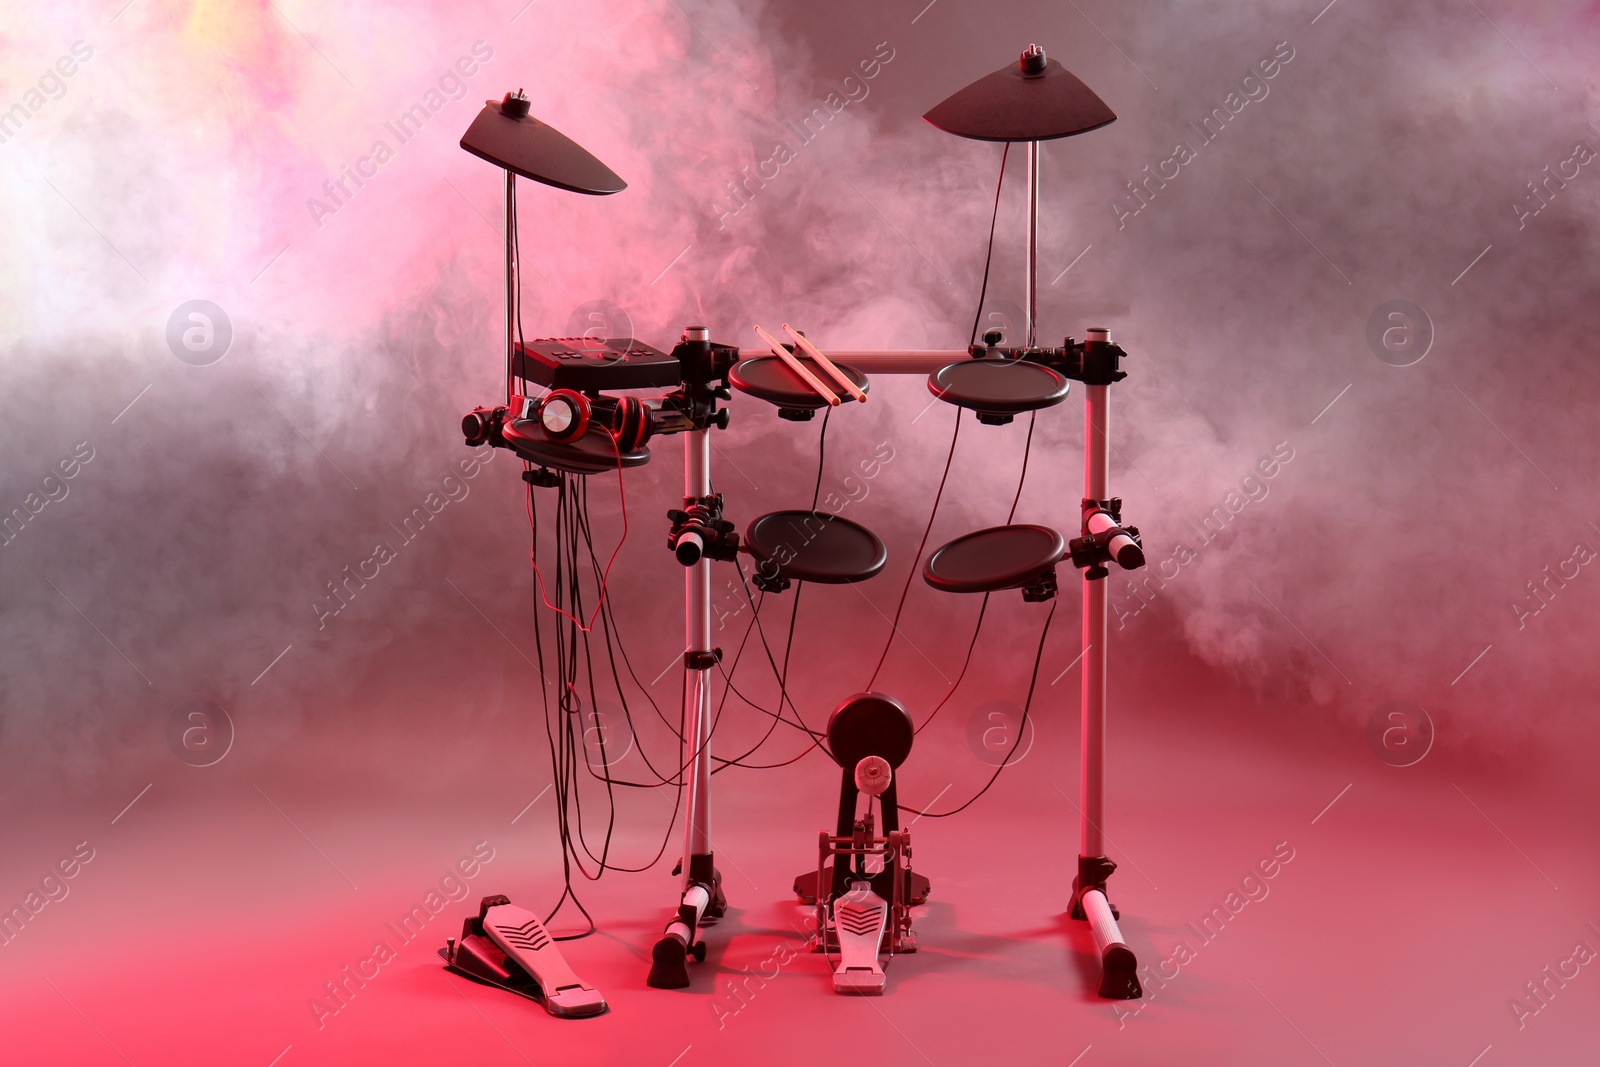 Photo of Modern electronic drum kit and smoke on grey background, toned in pink. Musical instrument